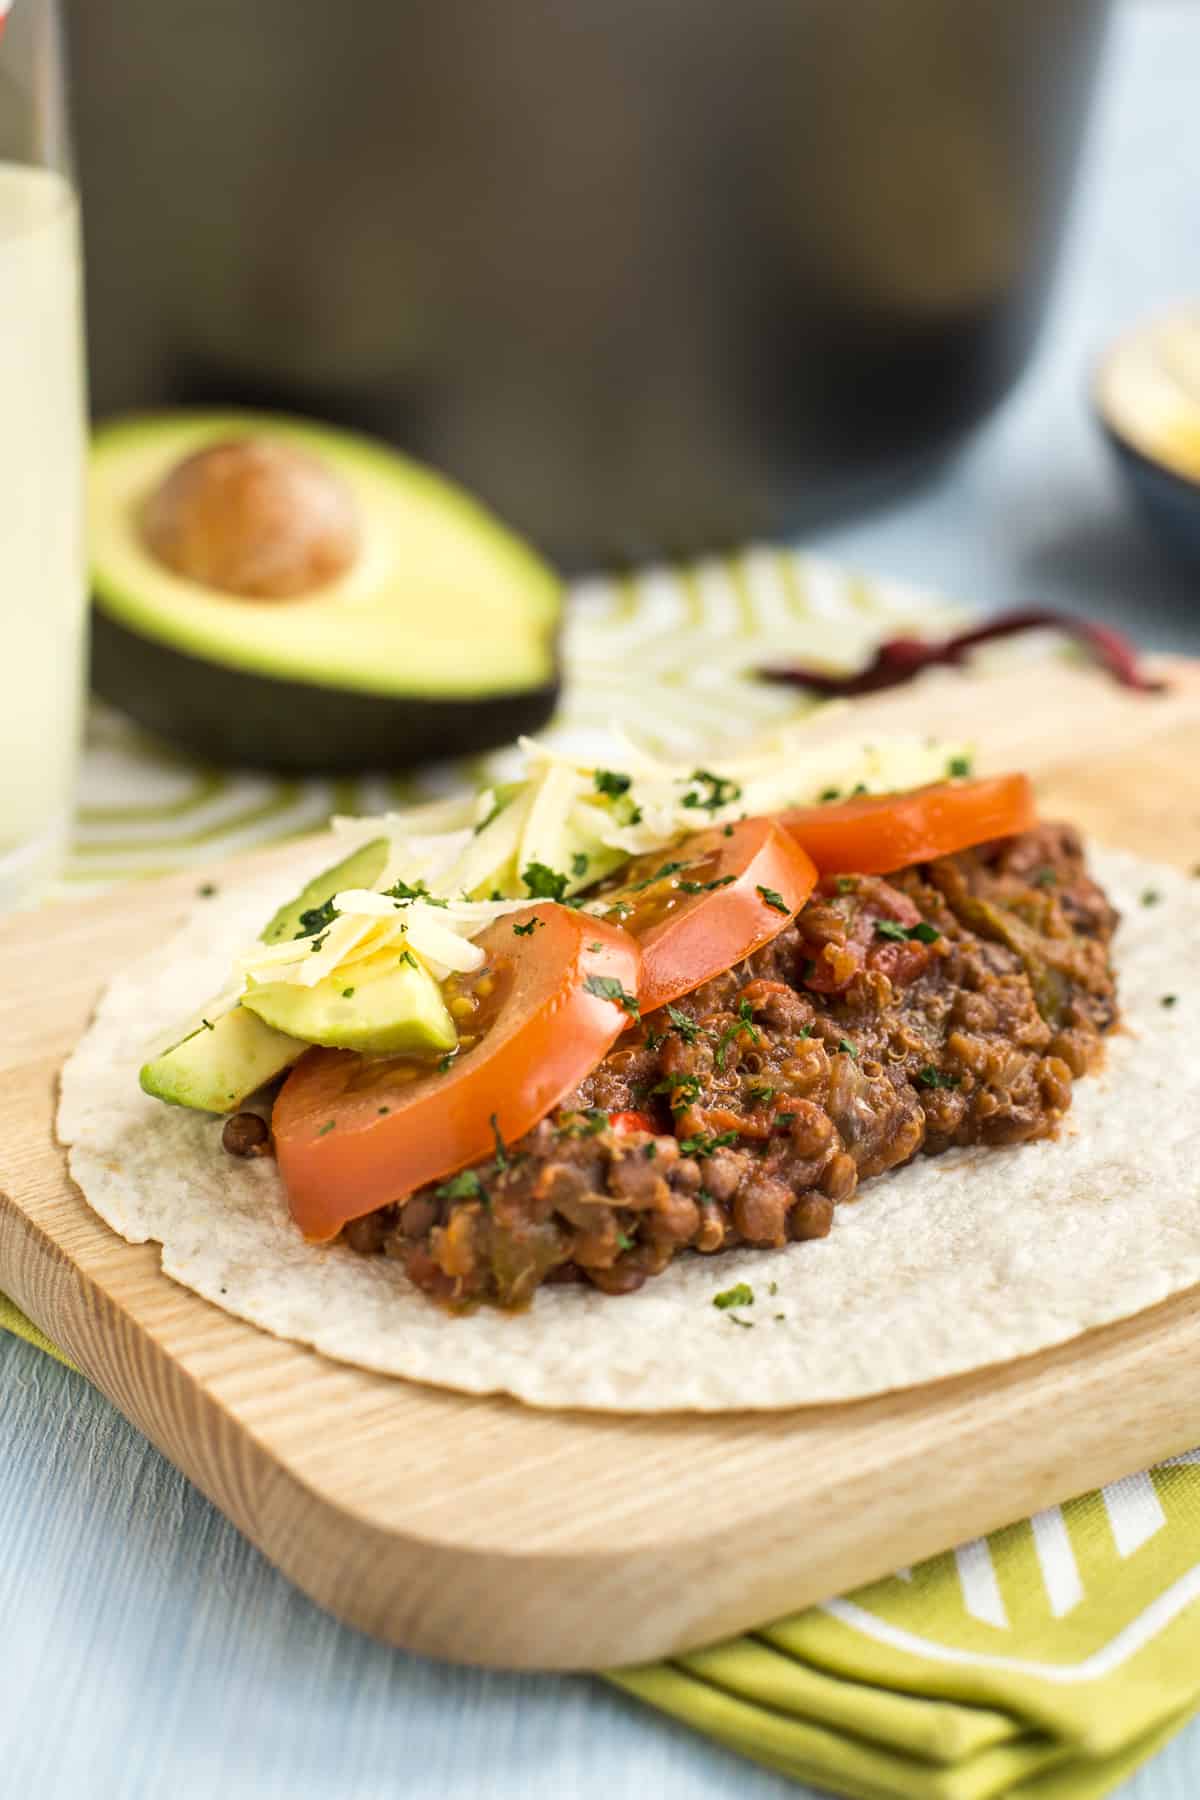 A lentil and quinoa taco topped with sliced tomatoes and avocado.